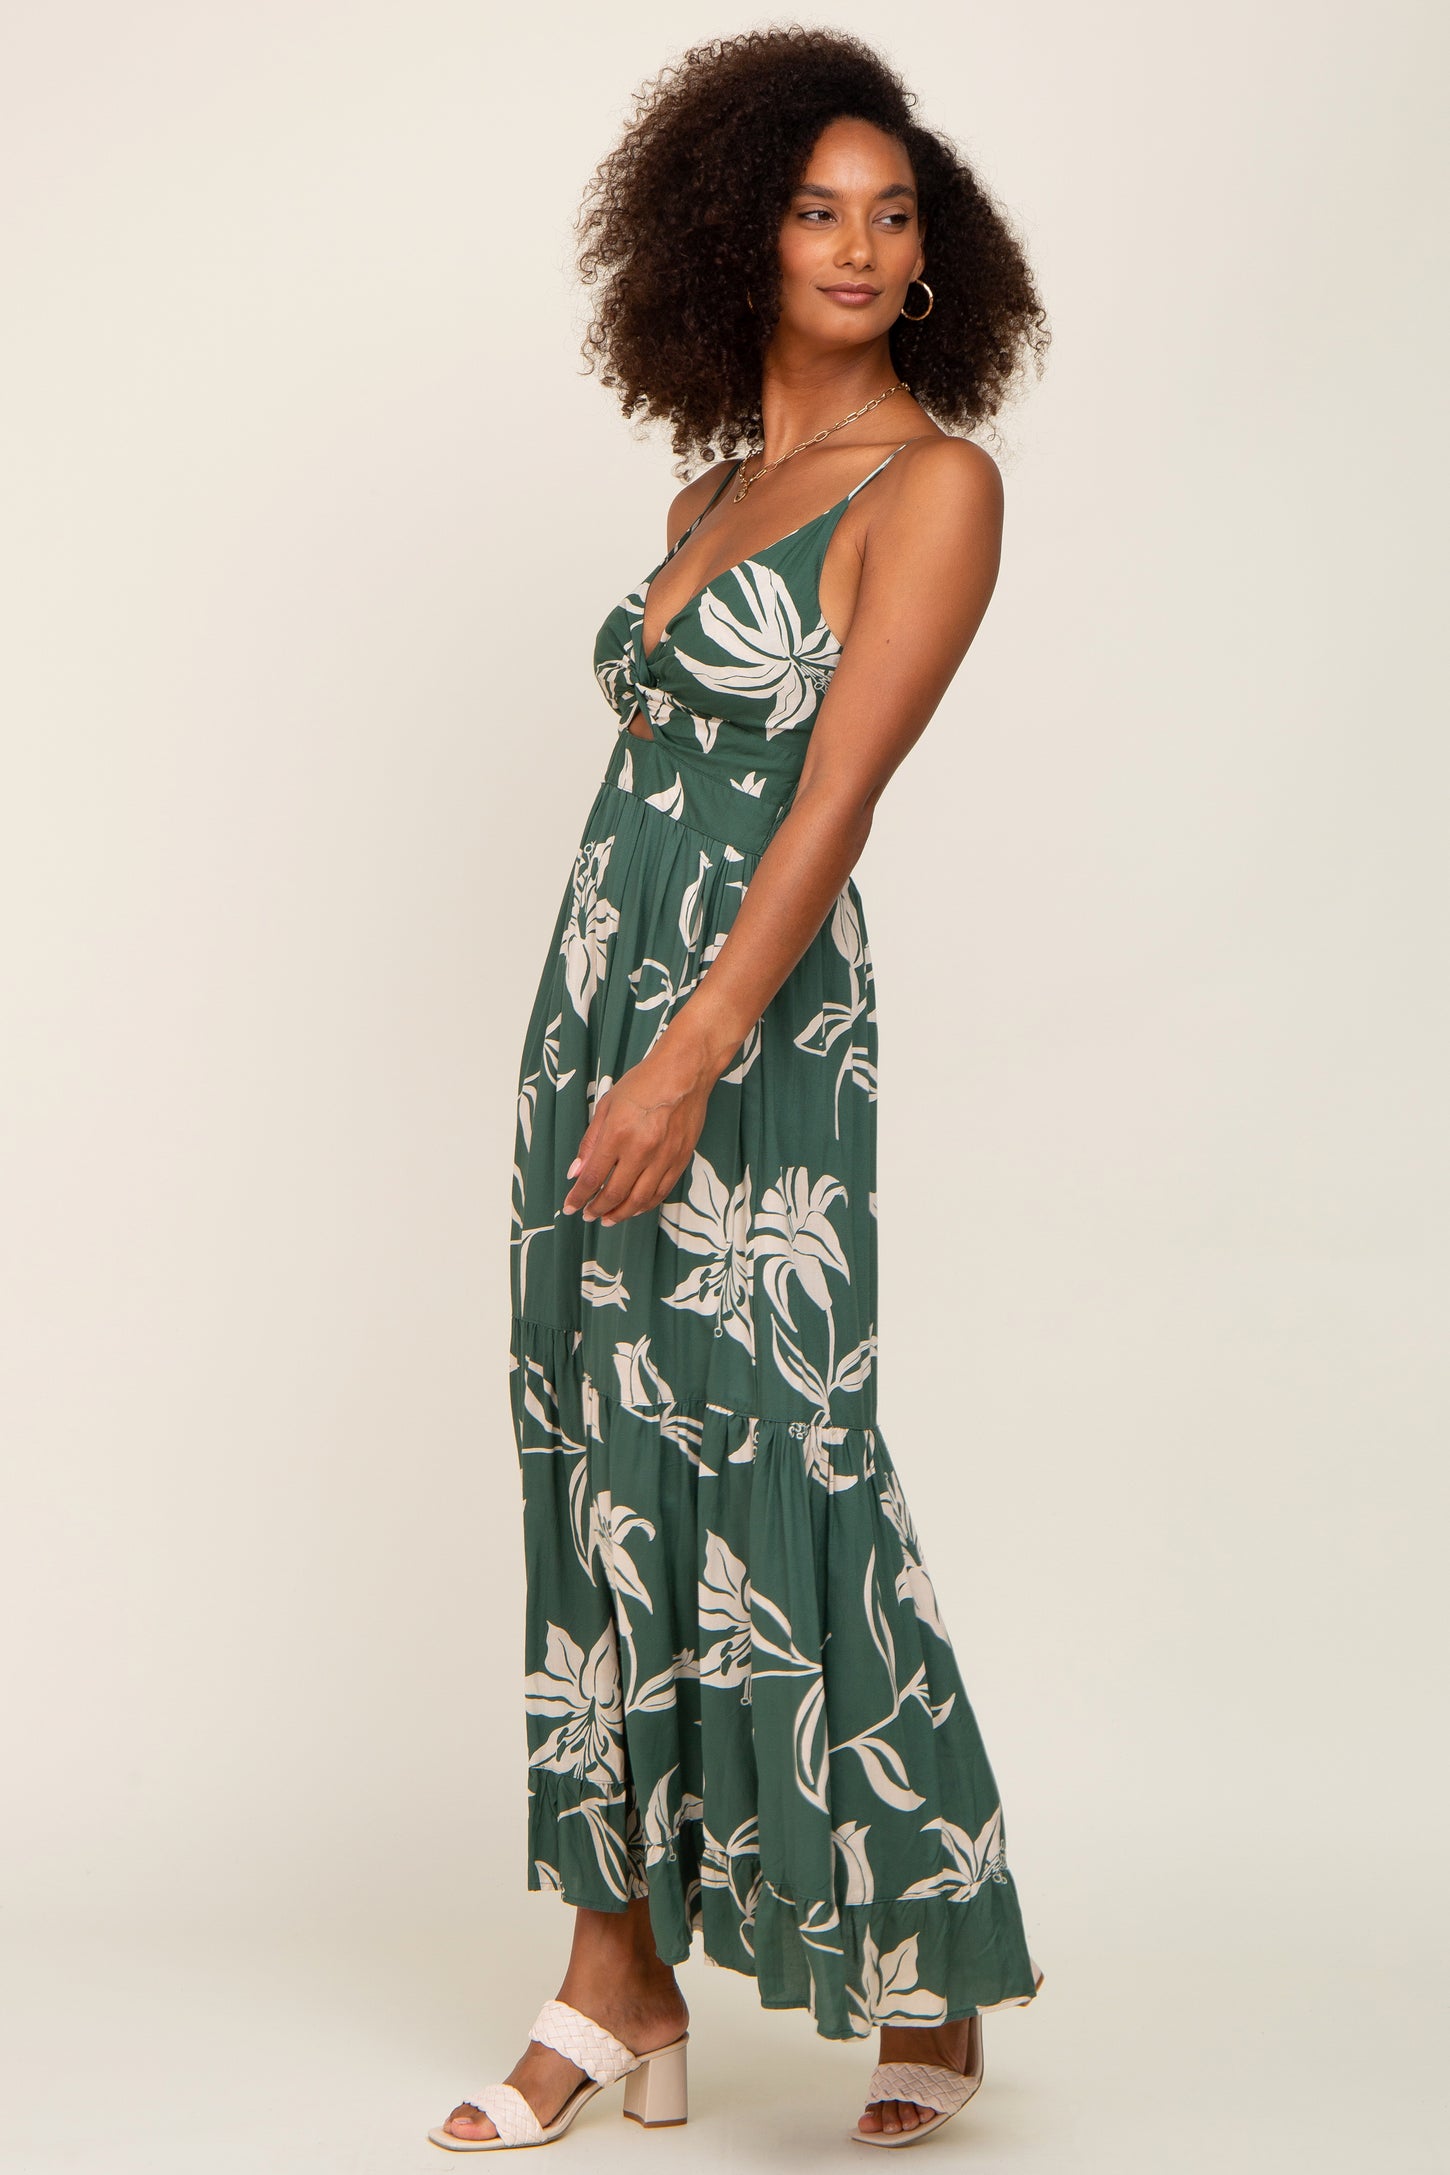 Forest Green Floral Front Twist Maxi Dress